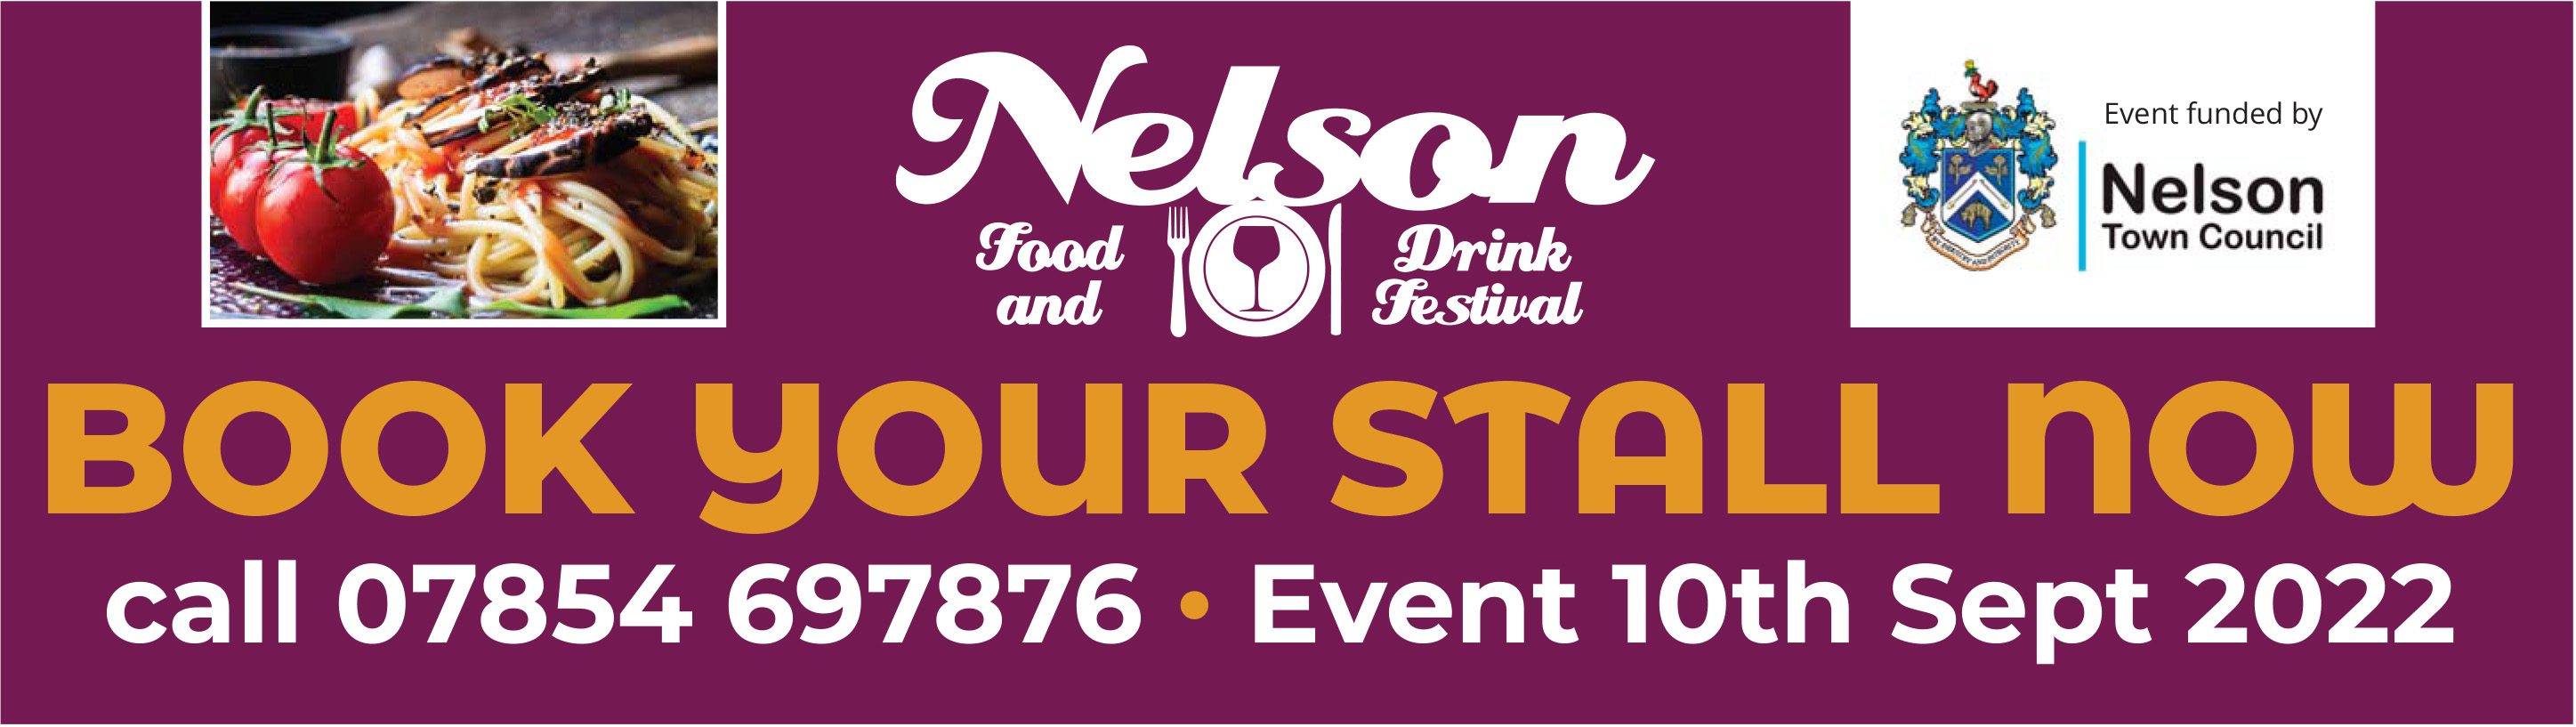 The Nelson Food and Drink Festival is back in 2022!